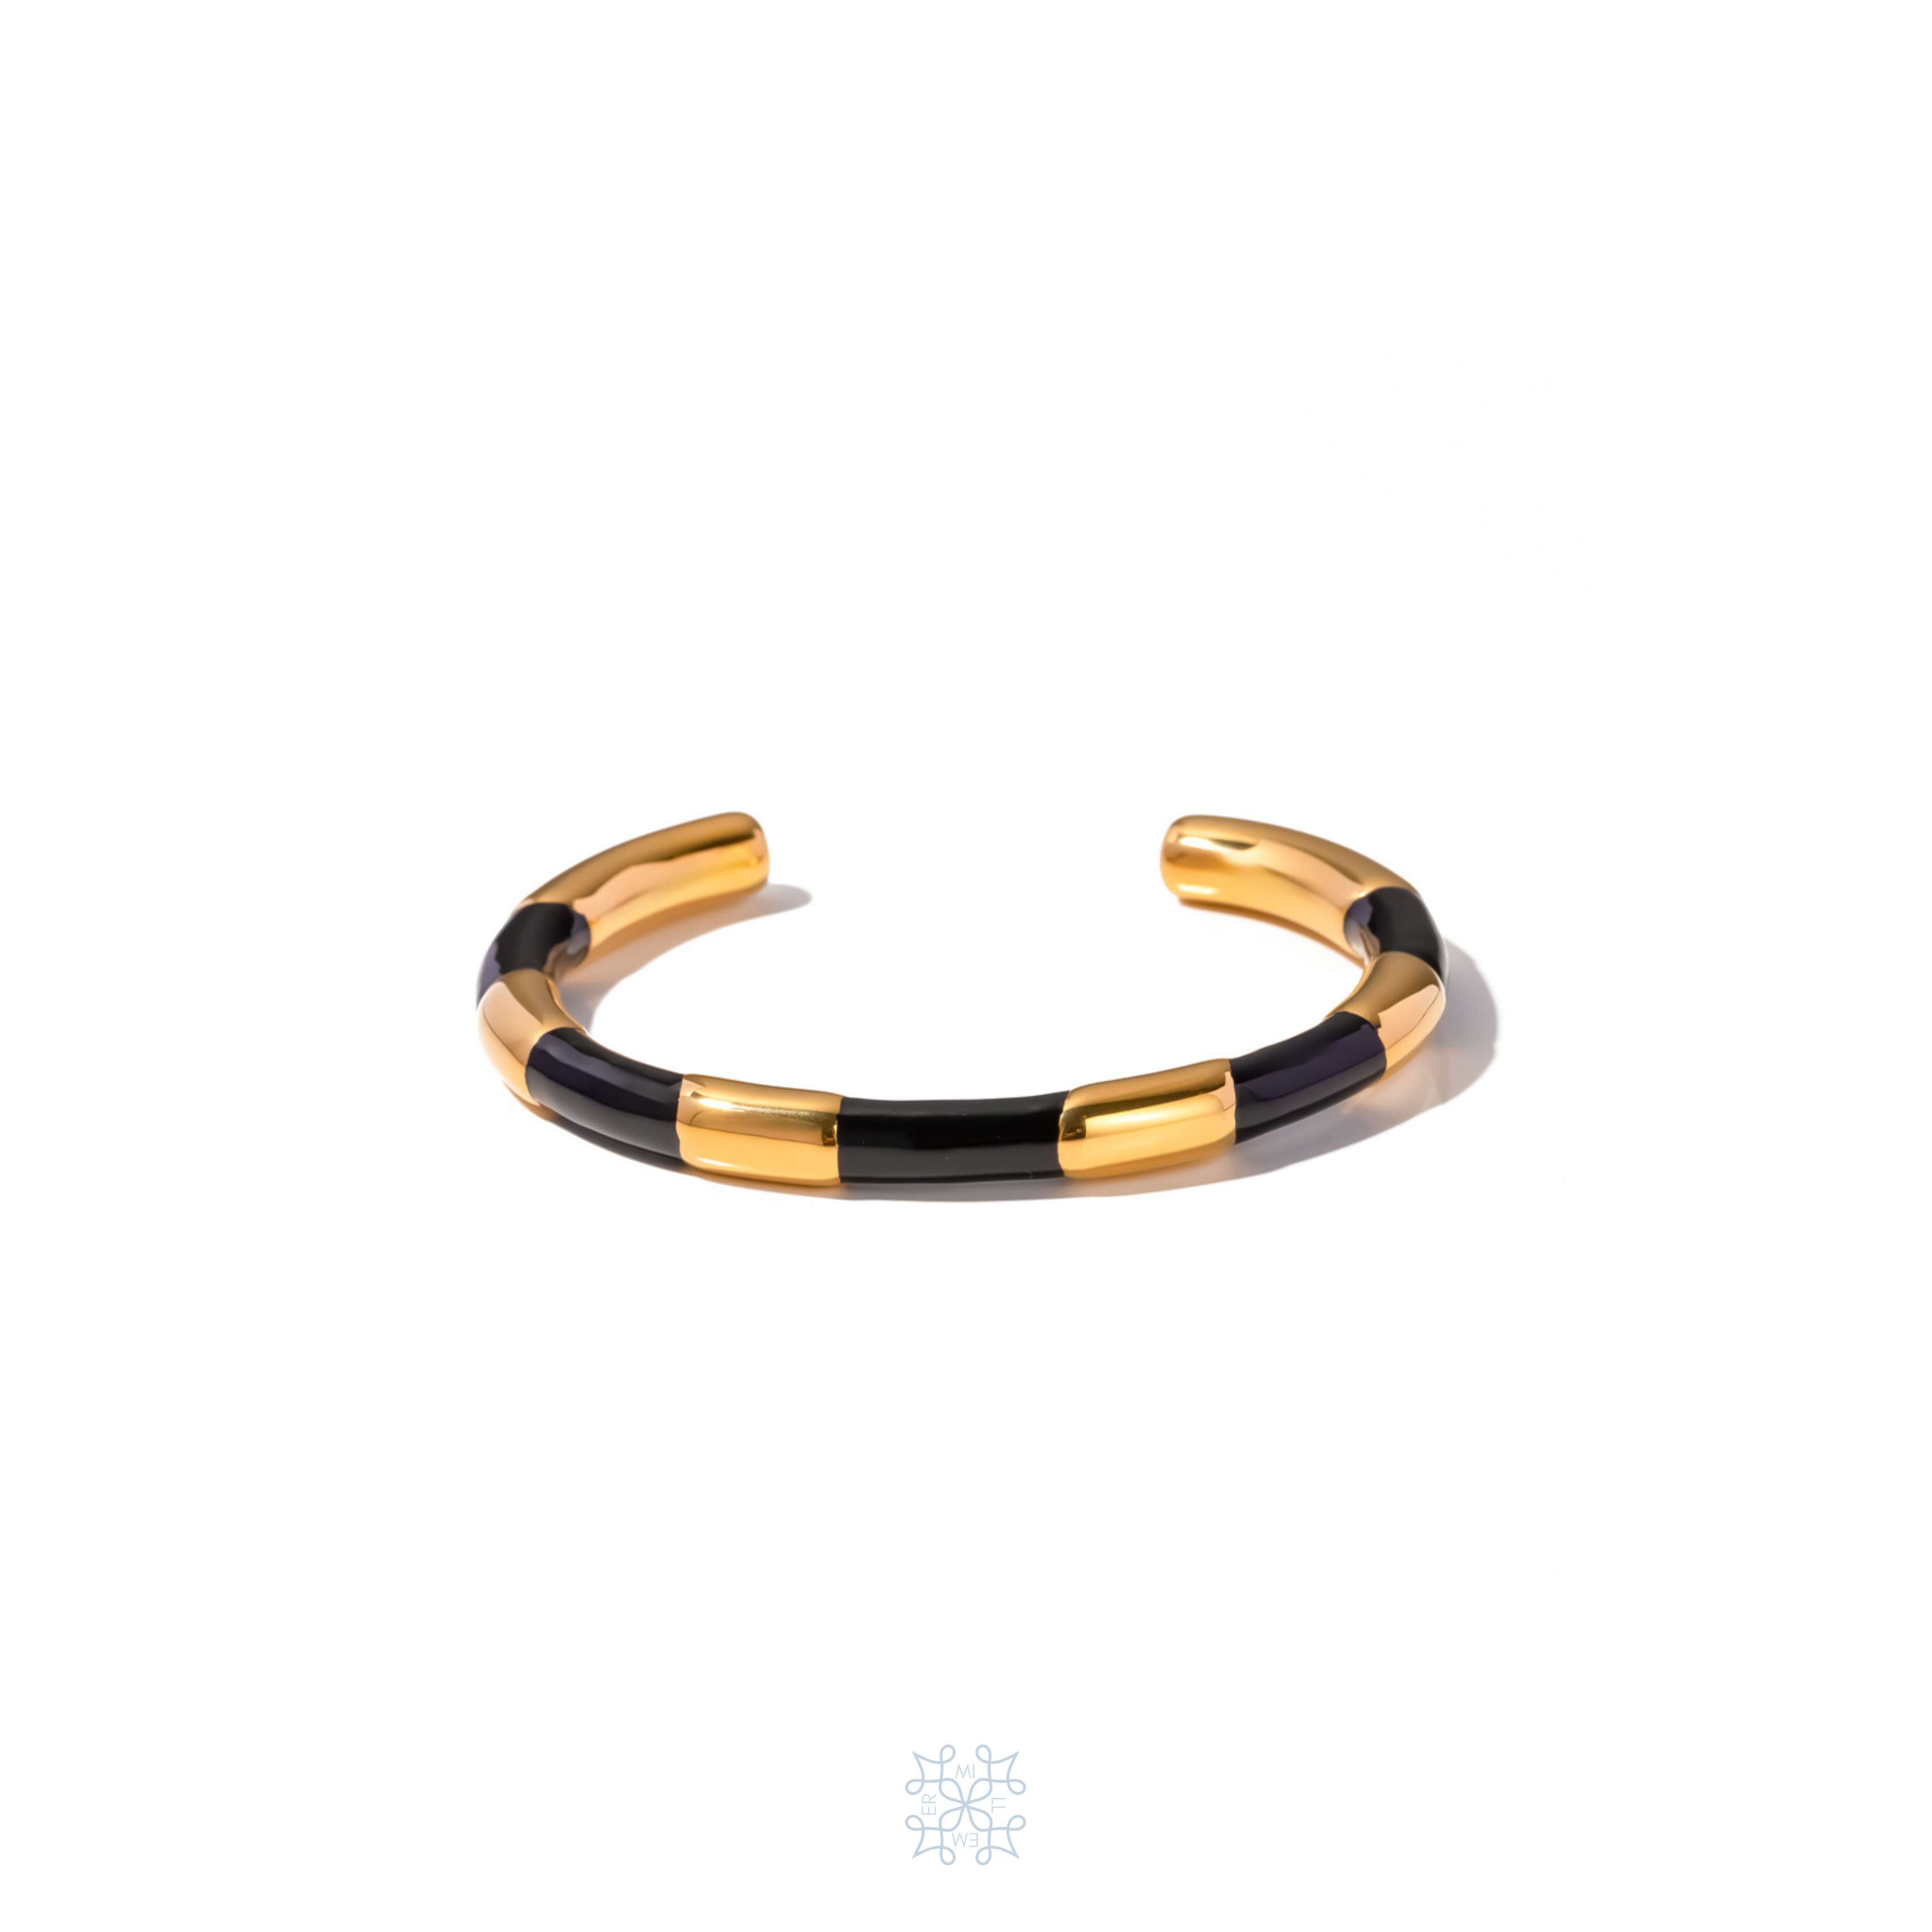 Gold Cuff bracelet. Black enamel painted creating the idea of a black ribbon around the gold cuff.